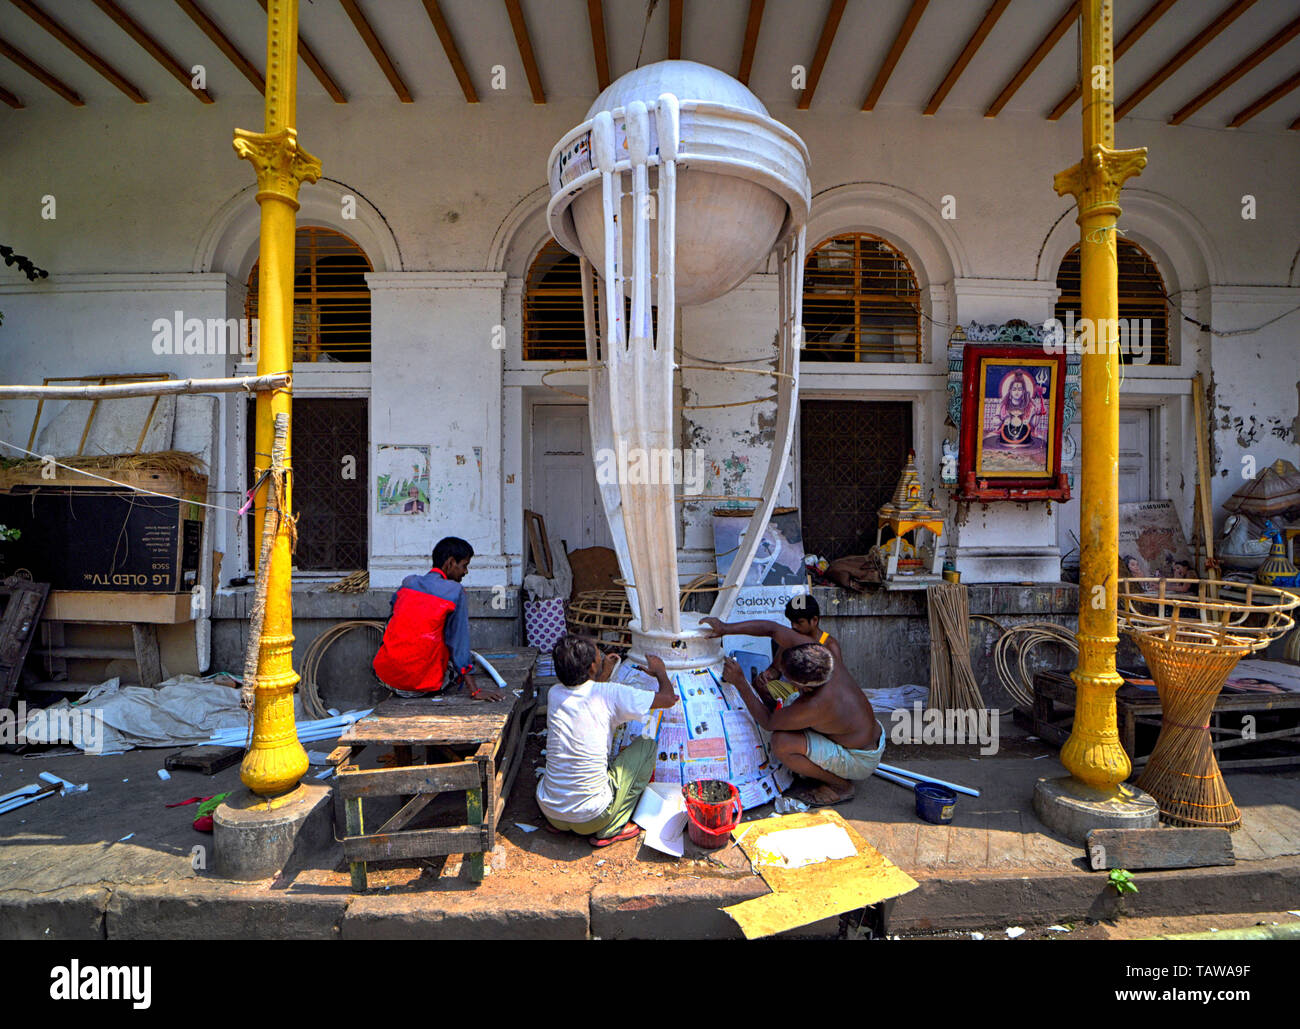 Kolkata, West Bengal, India. 28th May, 2019. Artists seen making final touches on a Giant Replica of the World Cup Cricket 2019 Trophy, which will be placed at a shopping mall during the Tournament.World Cup Cricket is scheduled to start from 30th May 2019, hosted by England & Wales. Credit: Avishek Das/SOPA Images/ZUMA Wire/Alamy Live News Stock Photo